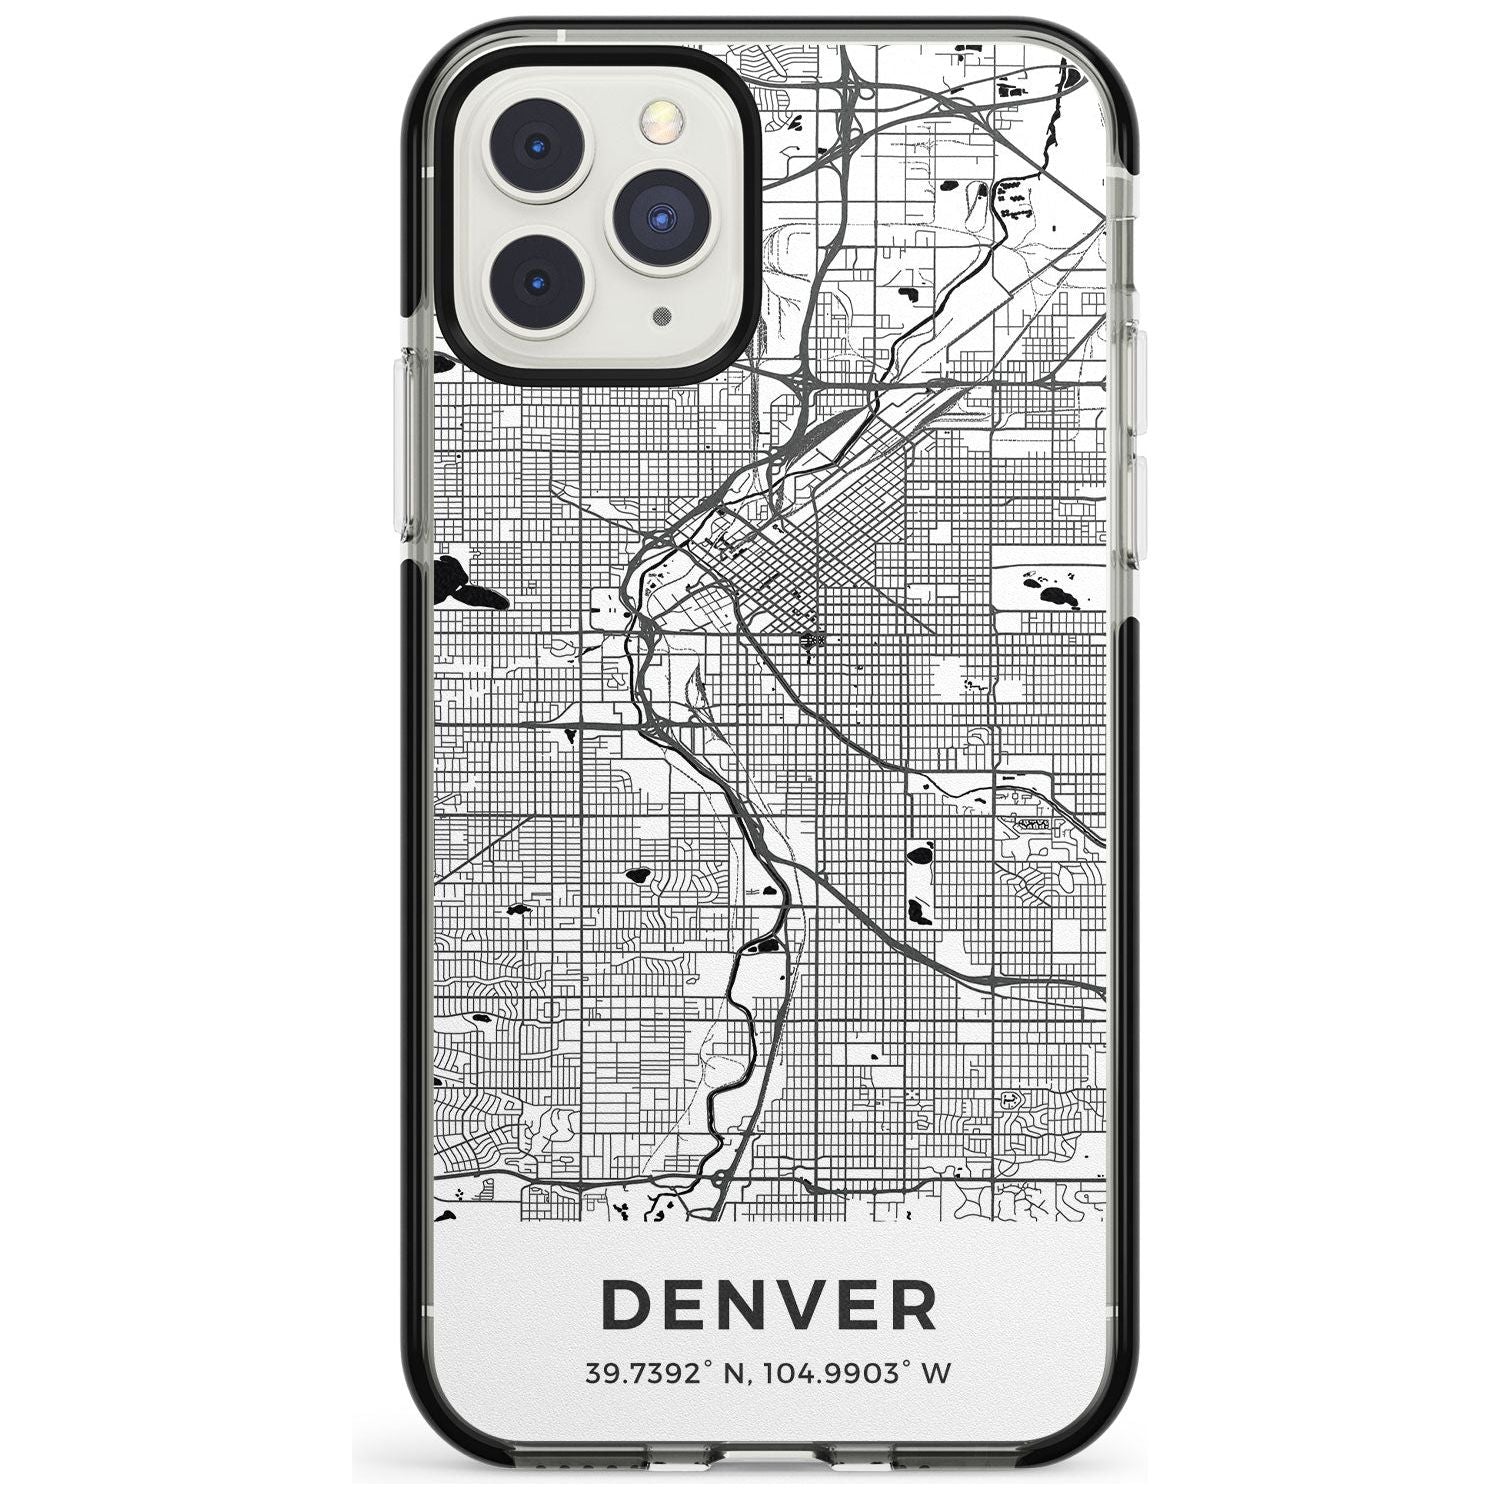 Map of Denver, Colorado Black Impact Phone Case for iPhone 11 Pro Max